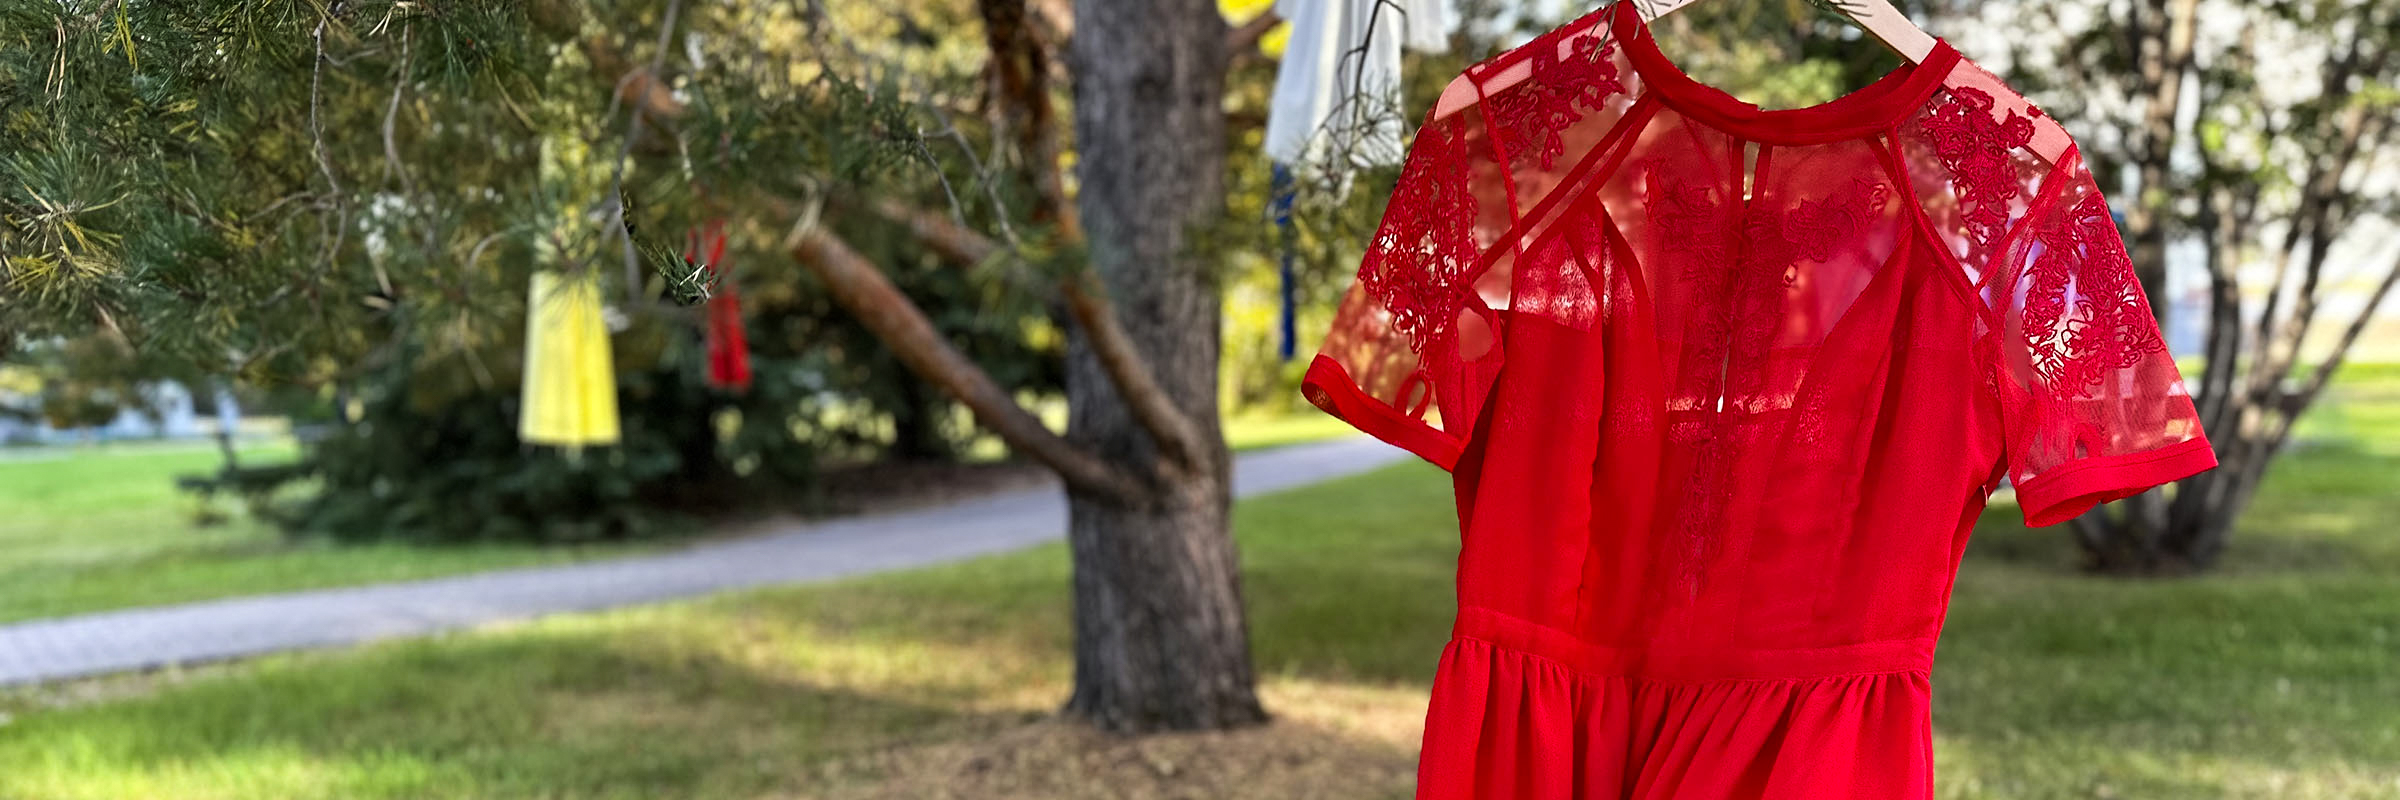 A red dress hanging from a tree and blowing in the wind.